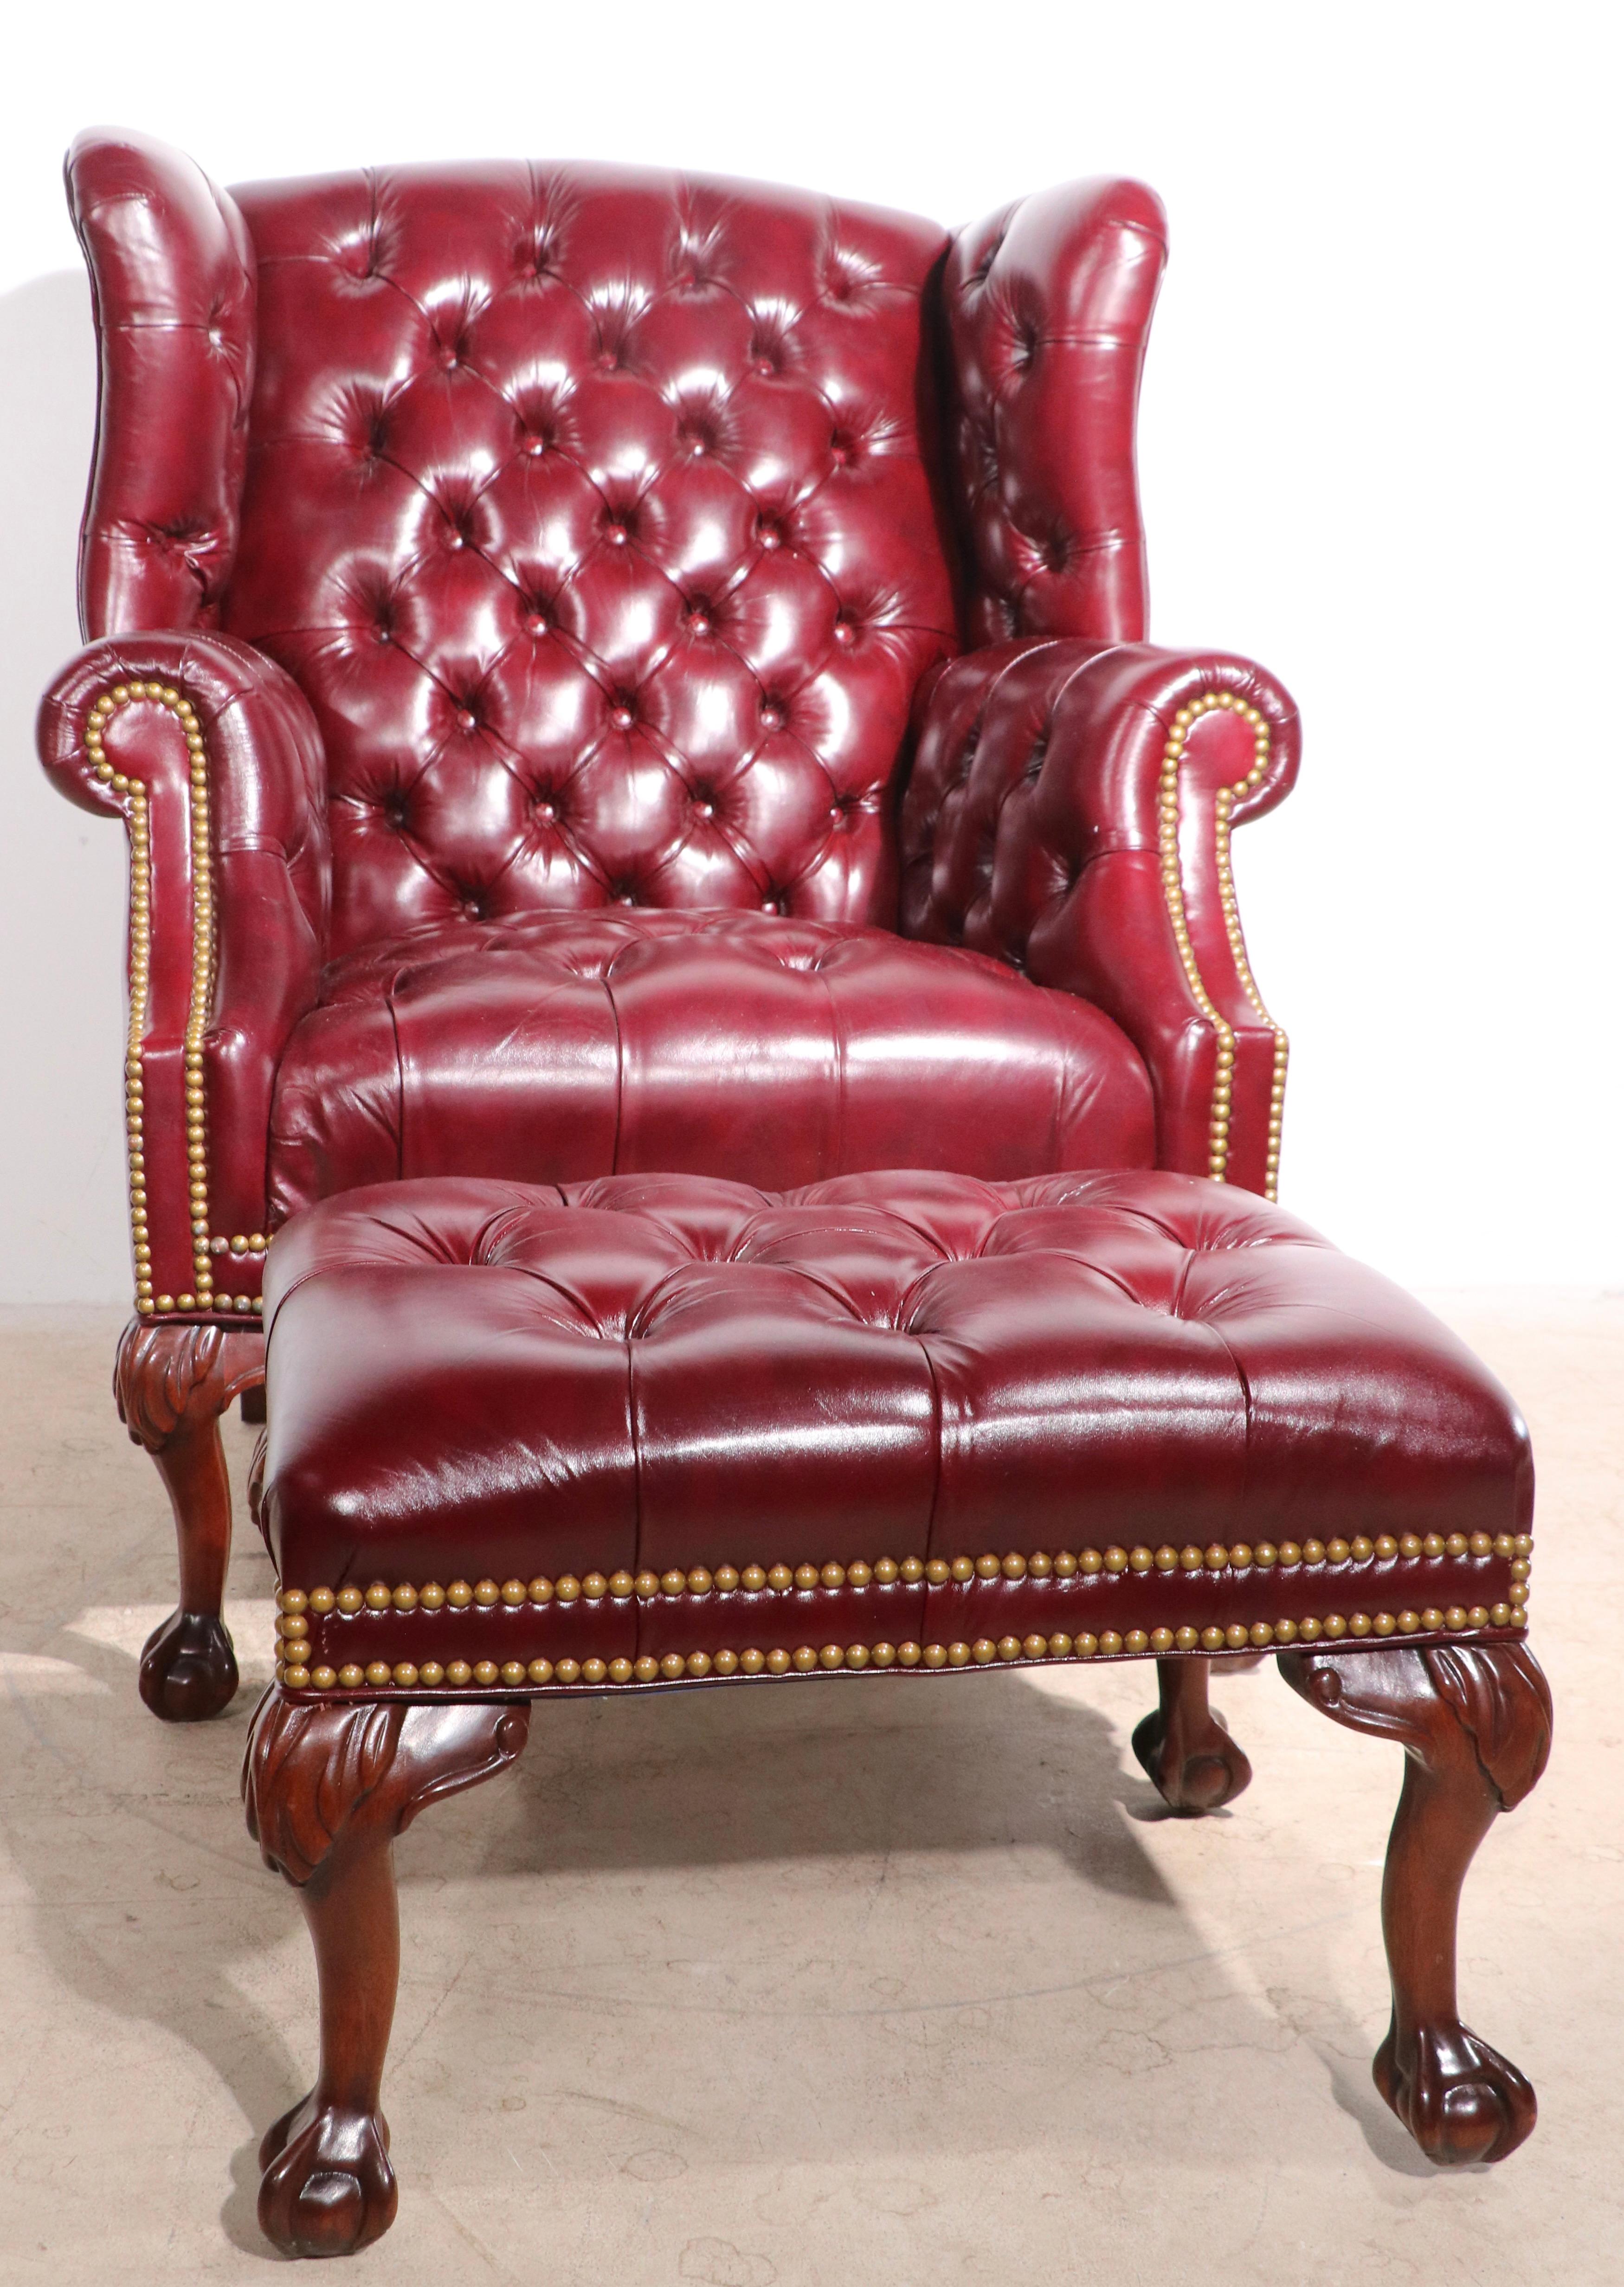 Chippendale Tufted Leather Wing Chair and Ottoman by Leathercraft Inc.